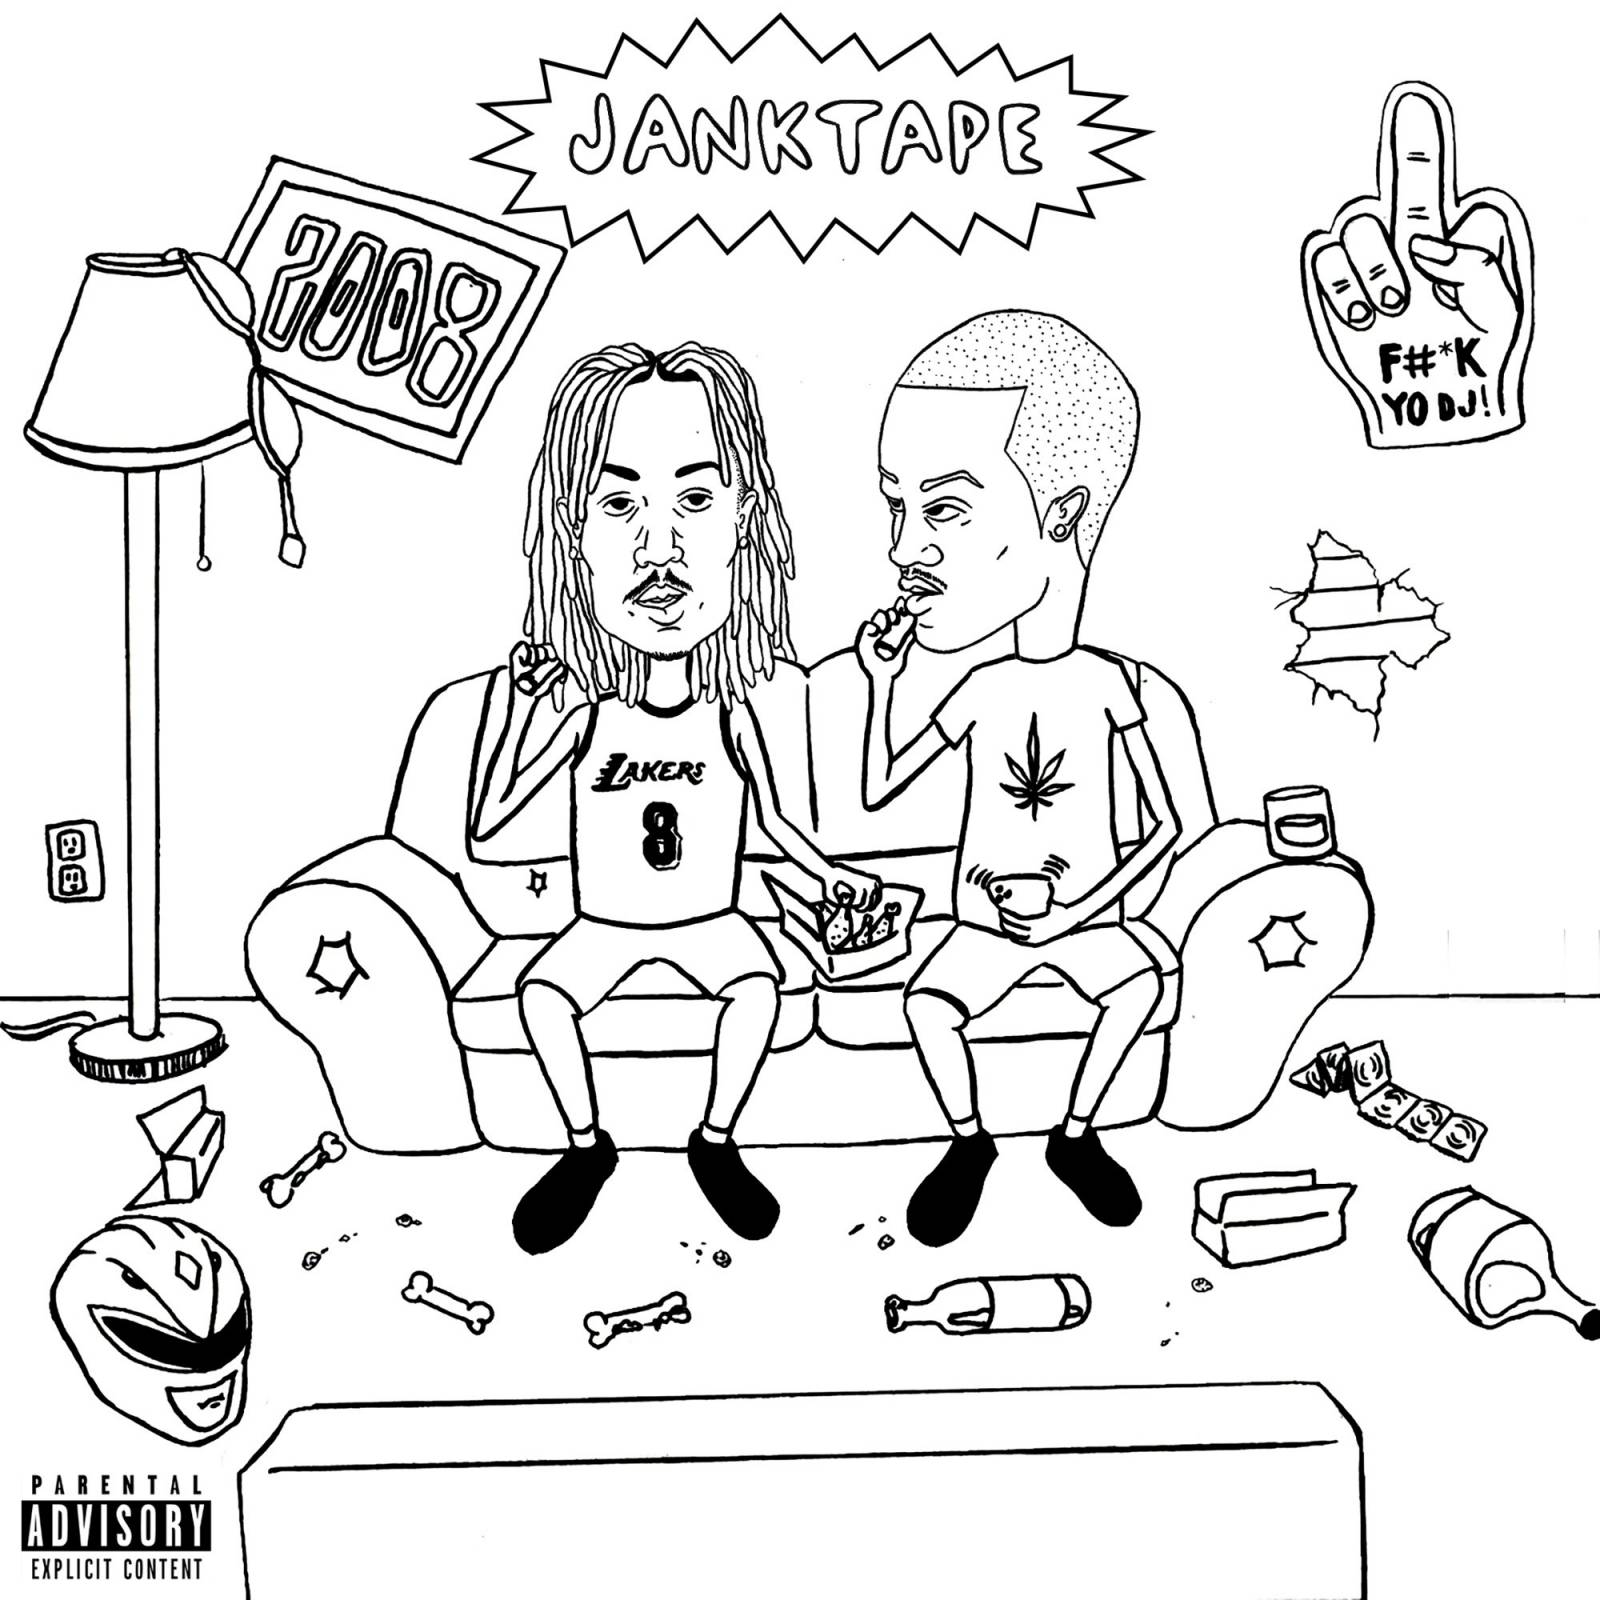 Buddy Connects With Kent Jamz For 'Janktape Vol. 1' Project